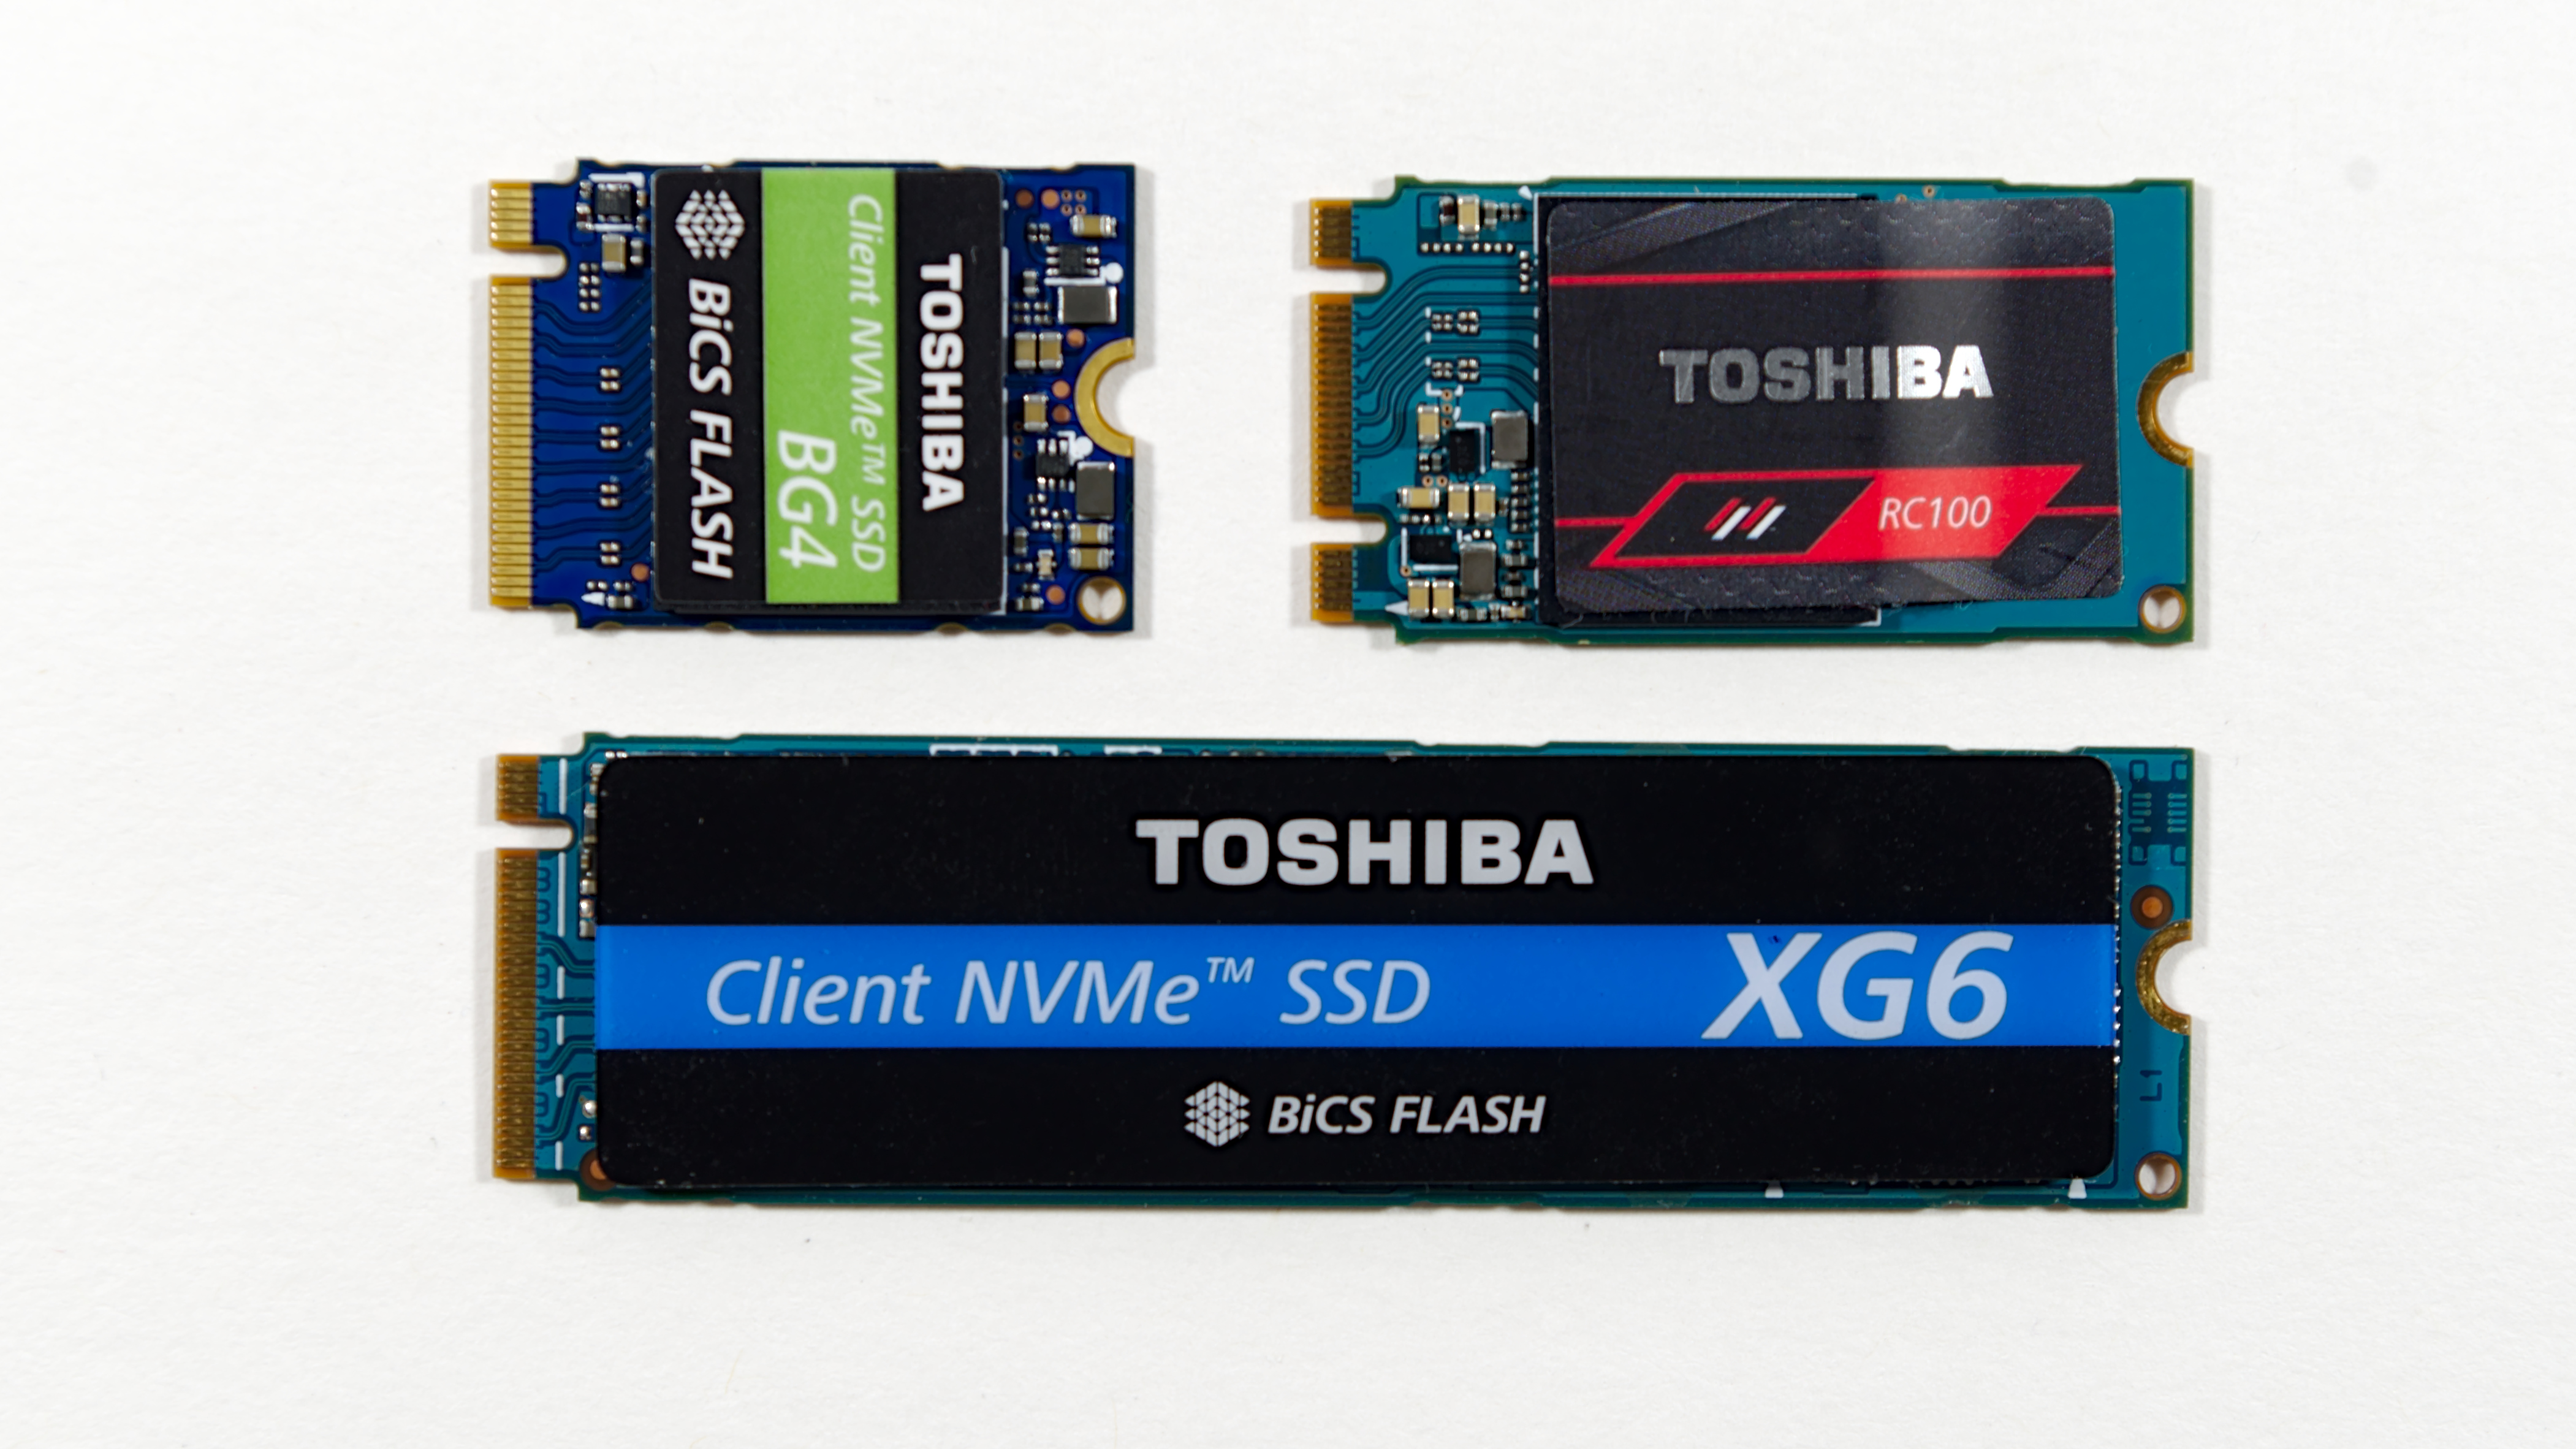 The Toshiba/Kioxia BG4 1TB SSD Review: A Look At Your Next 